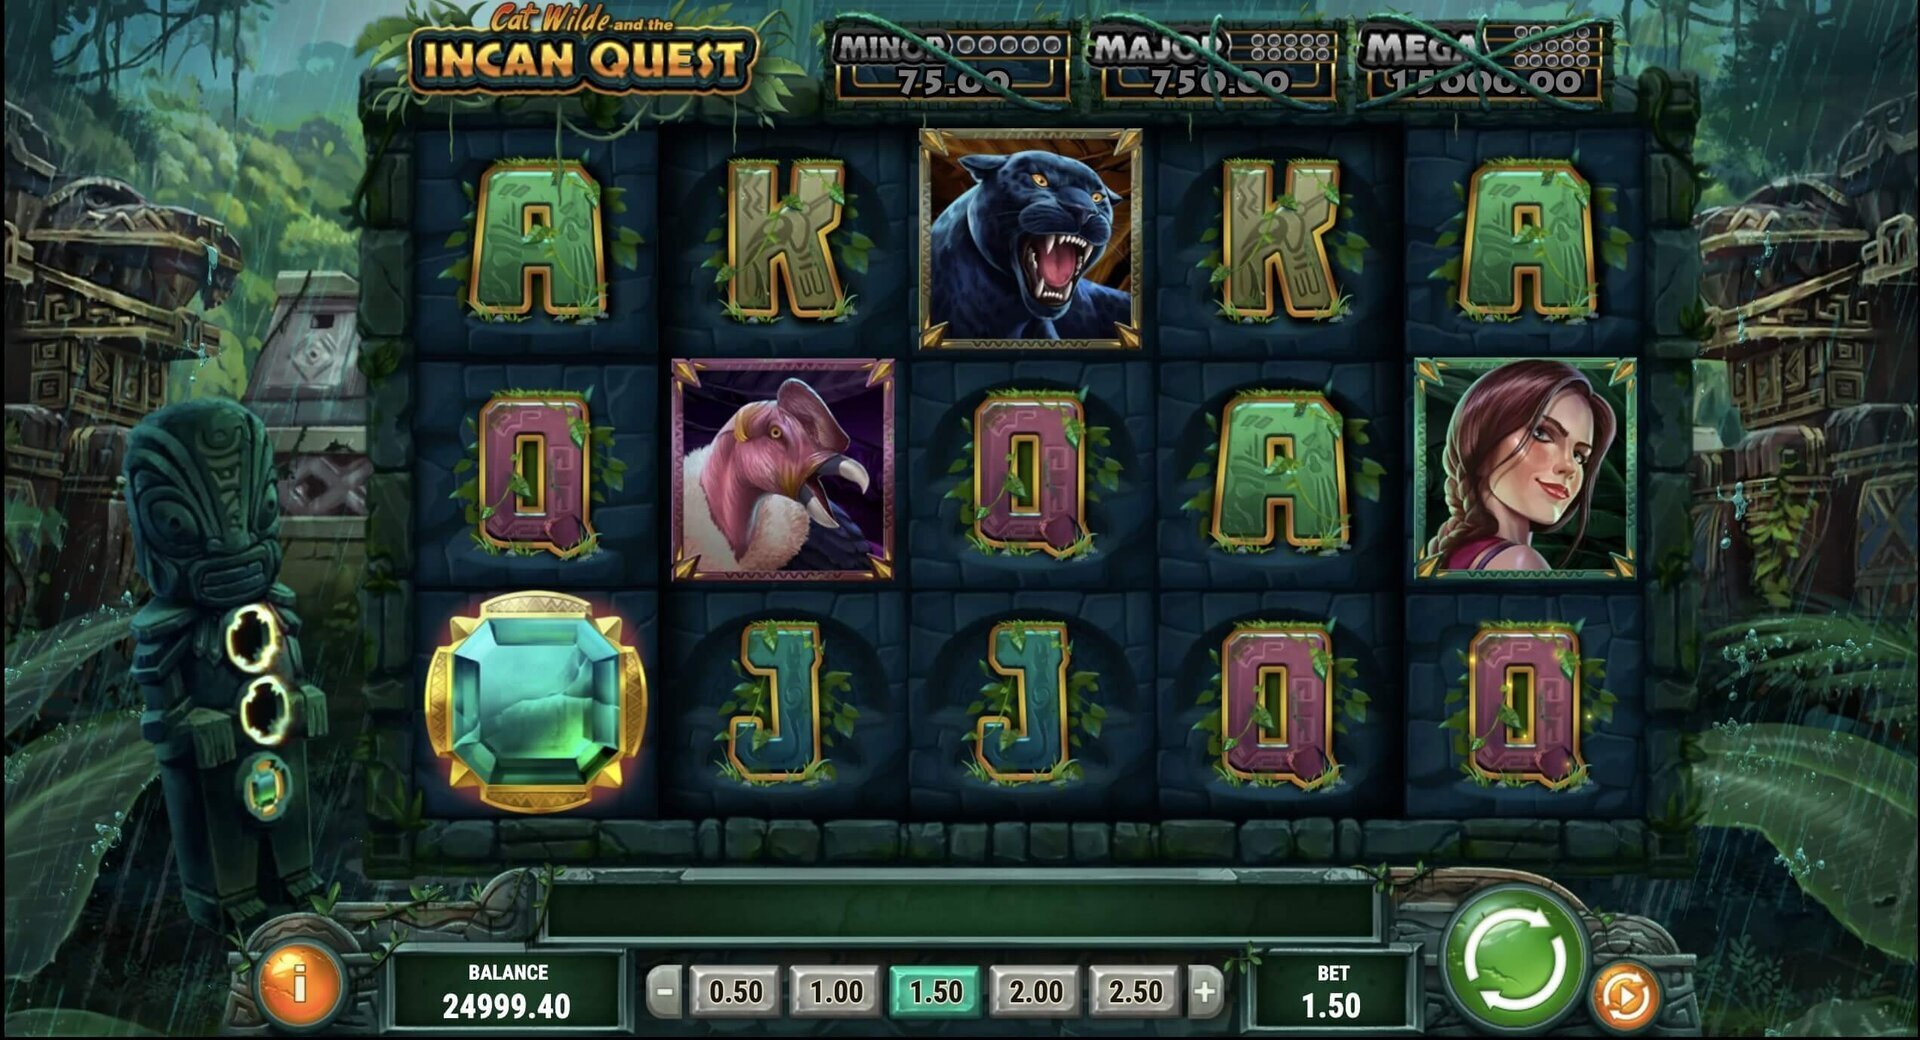 This is how Cat Wilde and the Incan Quest slot looks like